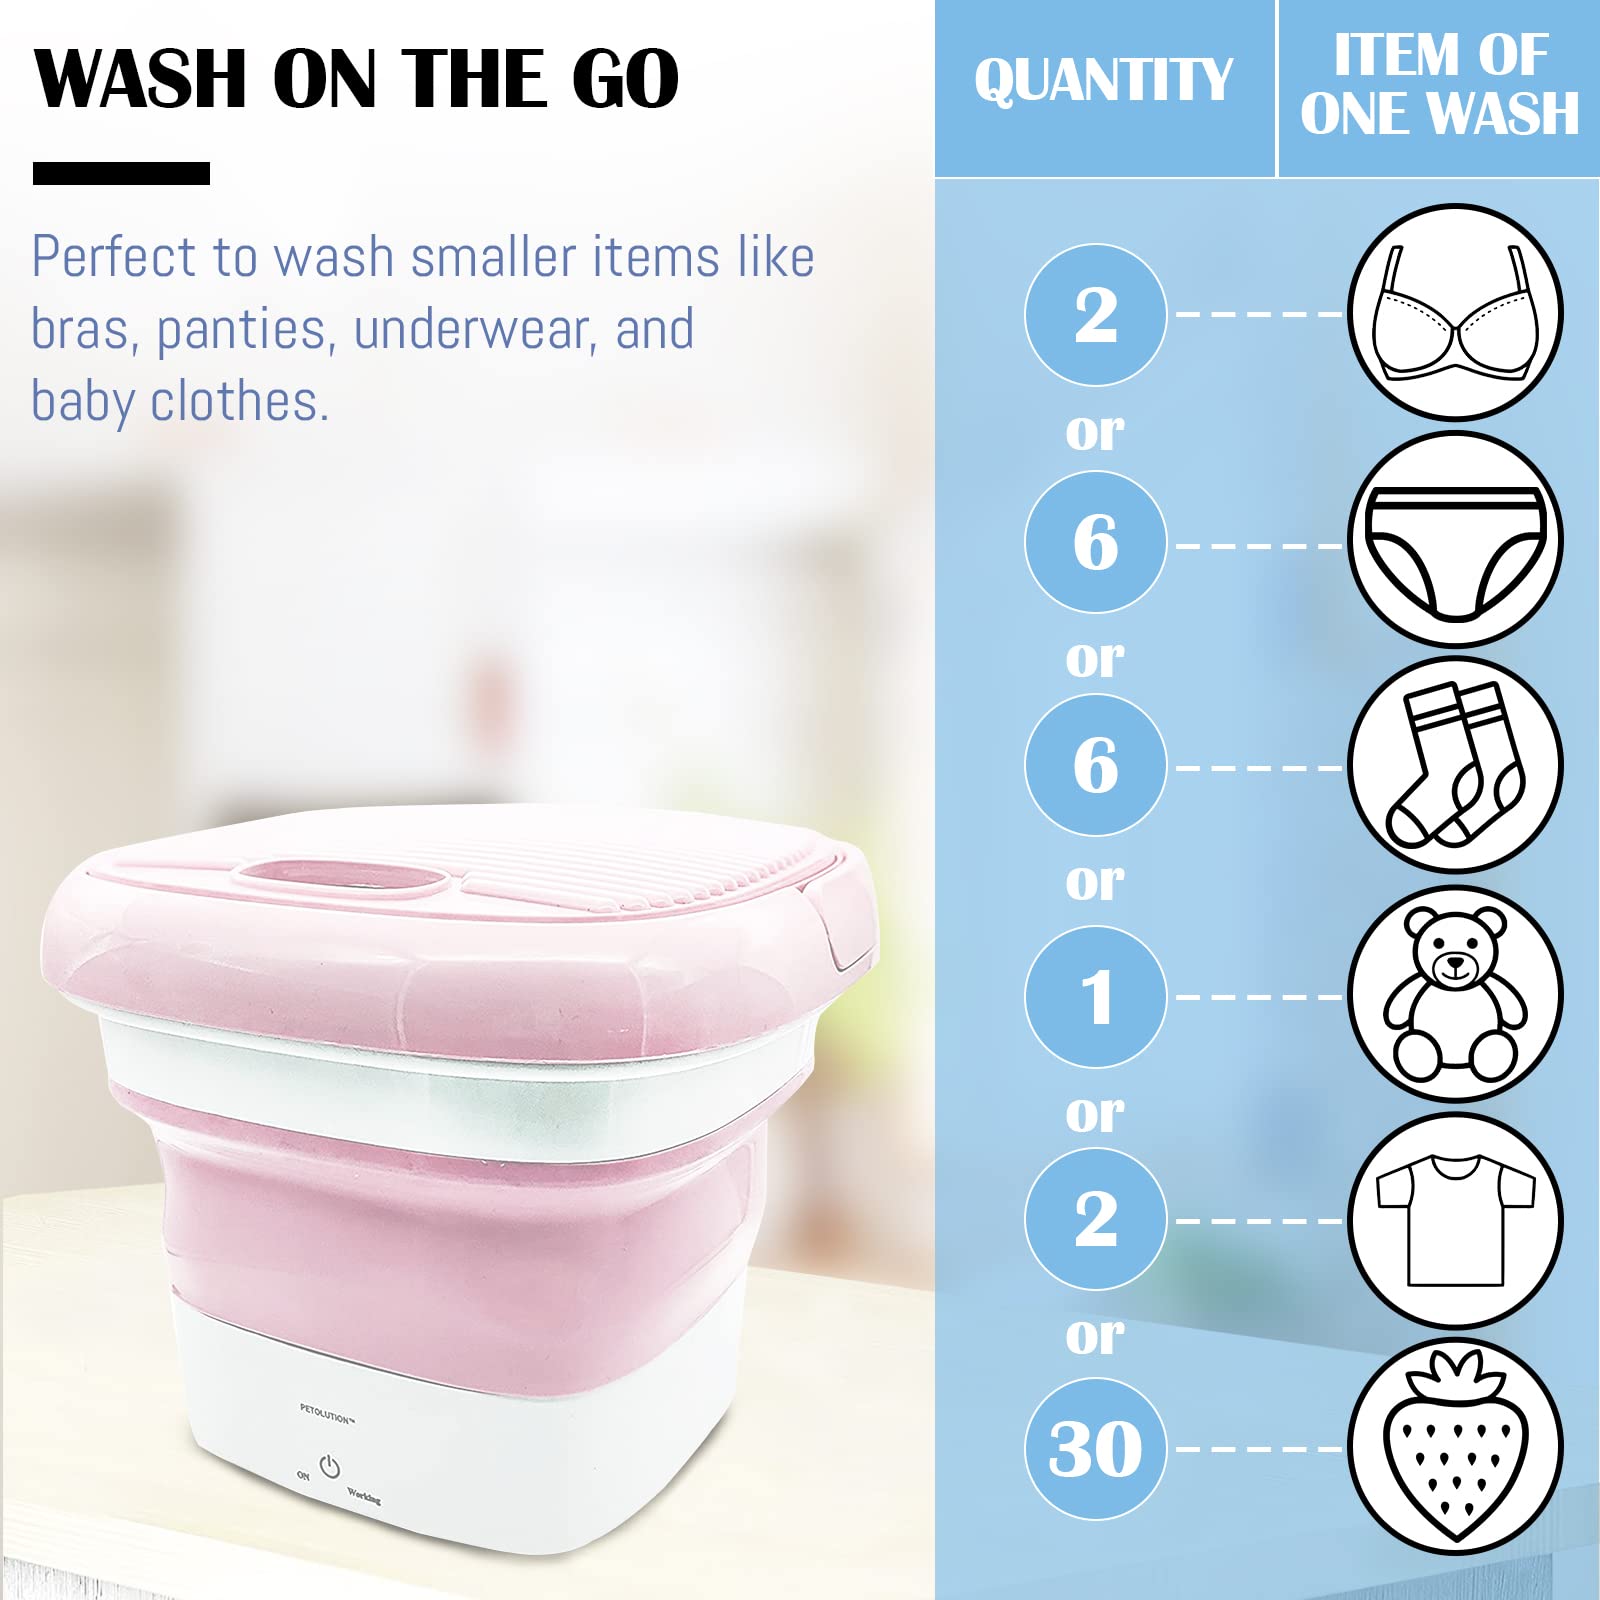 Mini Portable Washing Machine - Folding Washing Machine - Bucket Washer for Clothes Laundry- Collapsible Washing Machine - Underwear Washing Machine for Camping, RV, Travel, Small Spaces